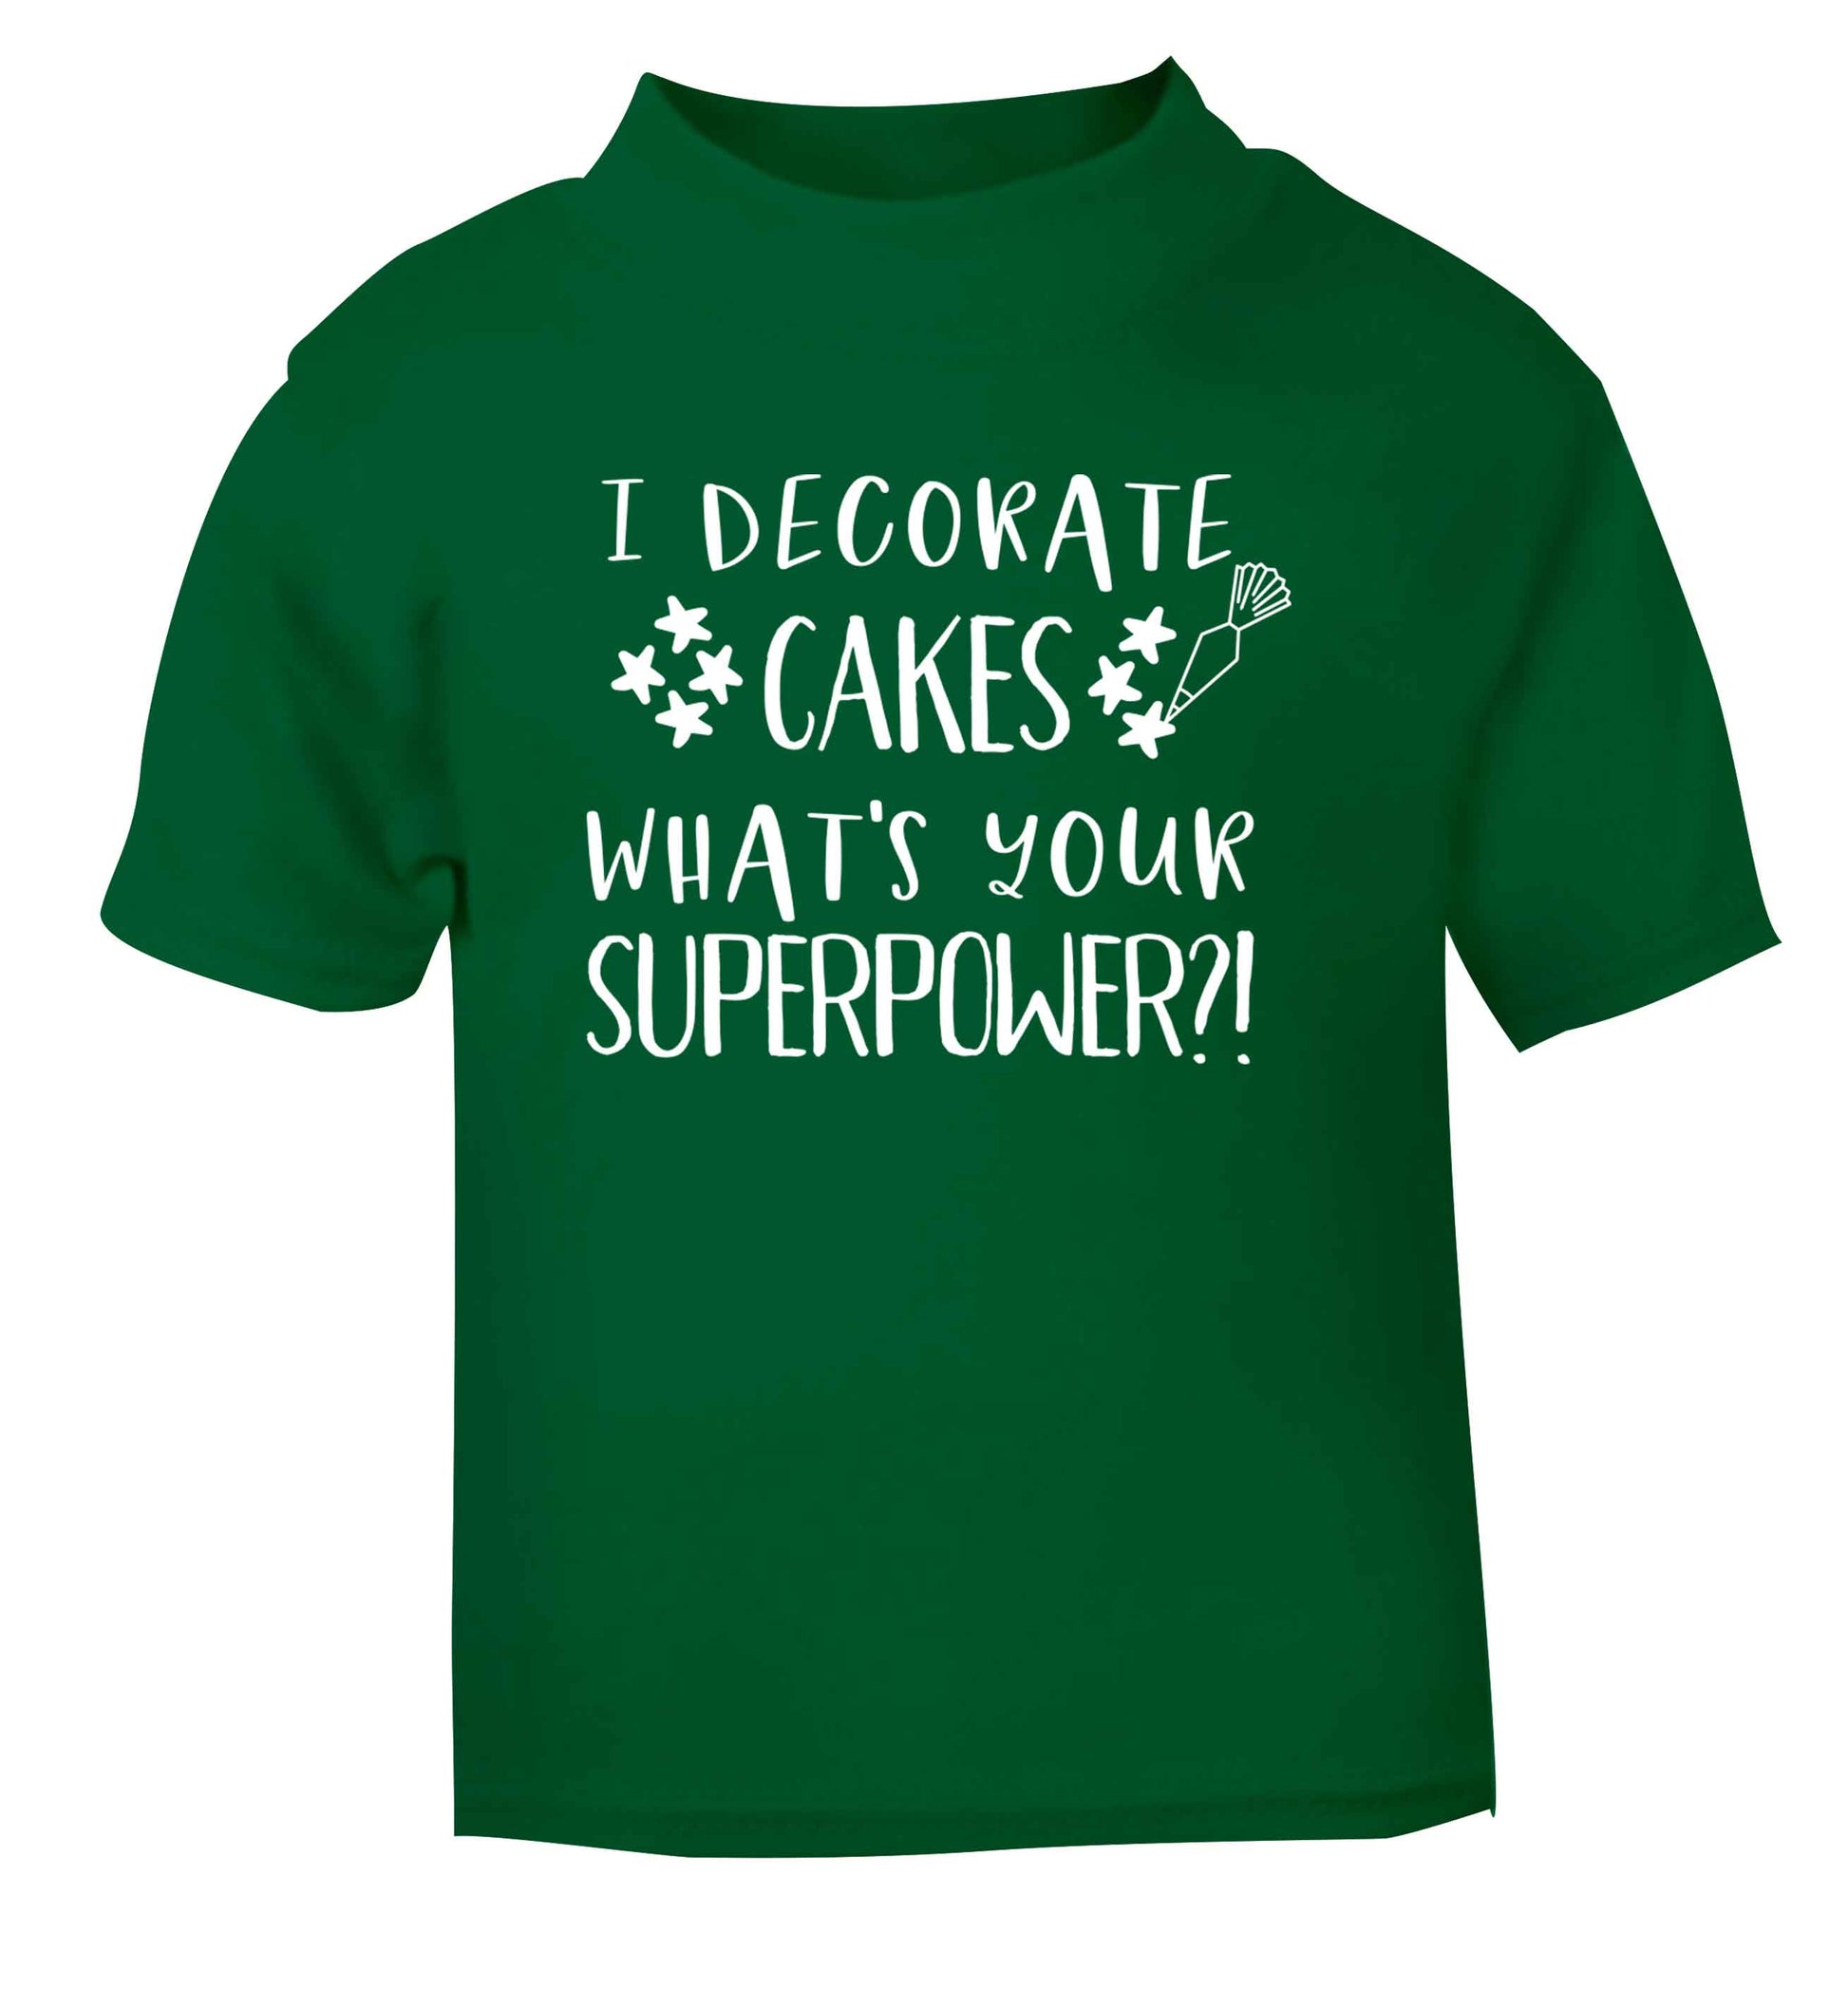 I decorate cakes what's your superpower?! green Baby Toddler Tshirt 2 Years